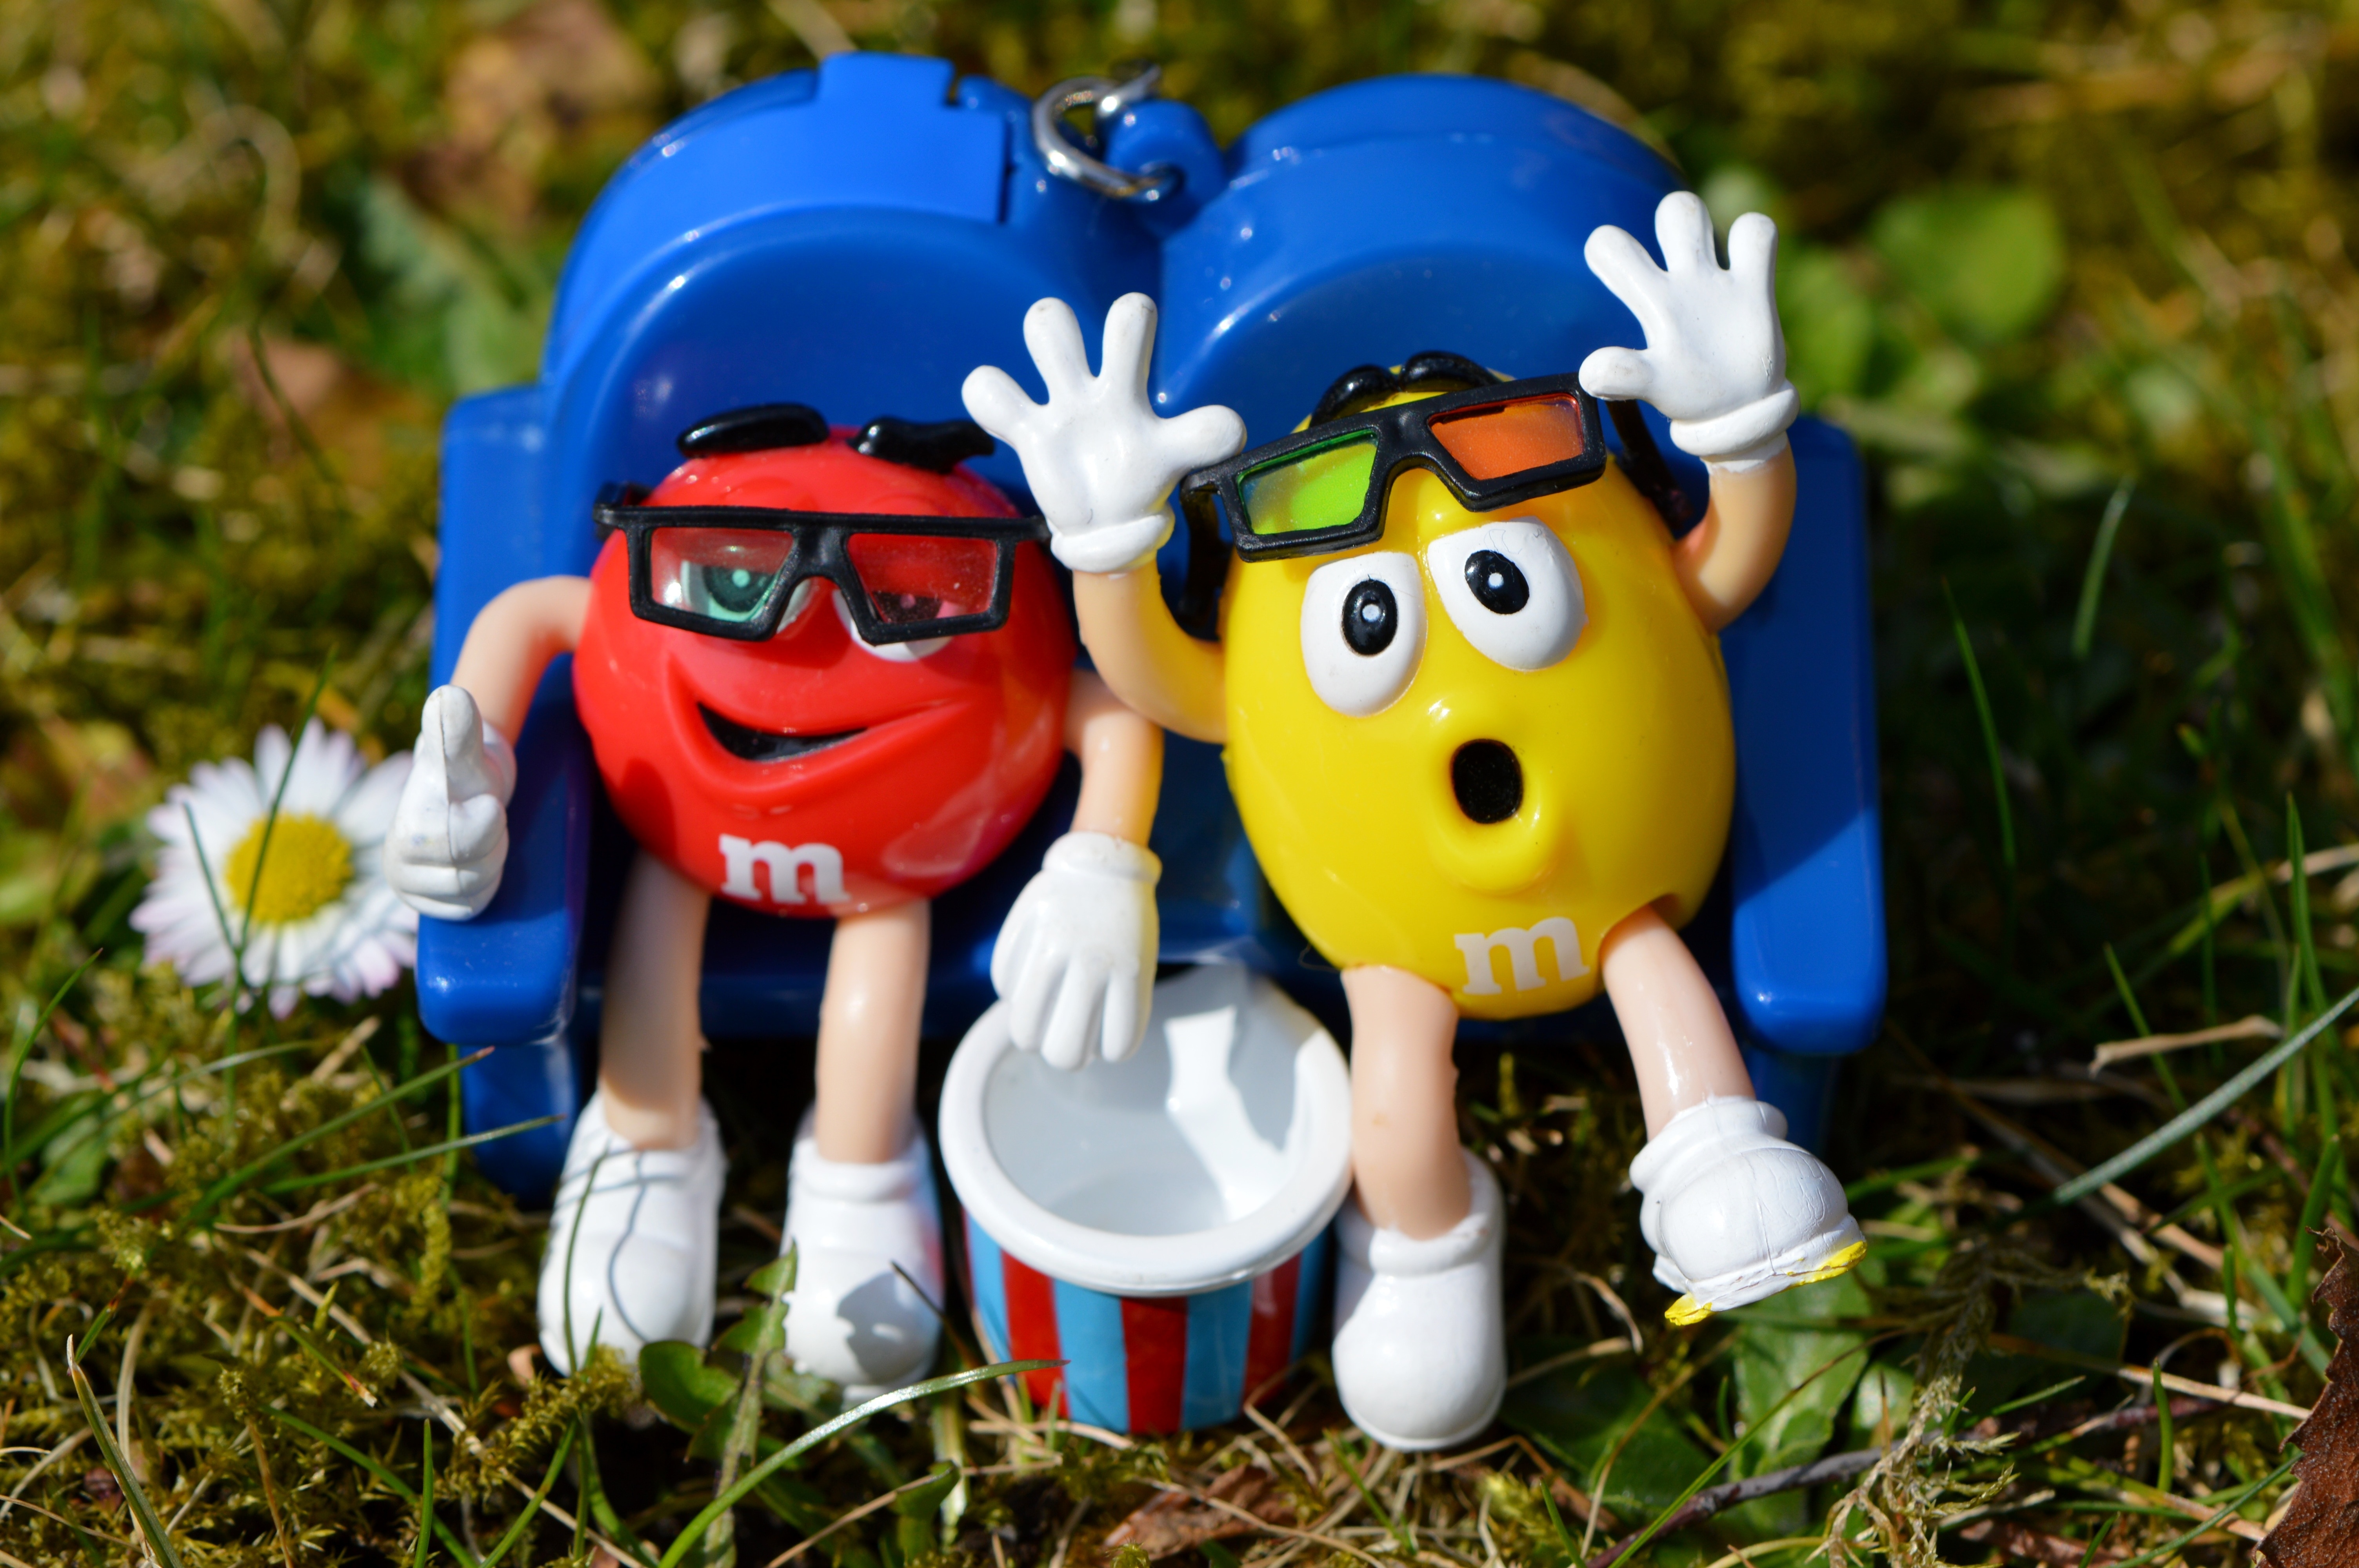 two yellow and red M and M's figurines